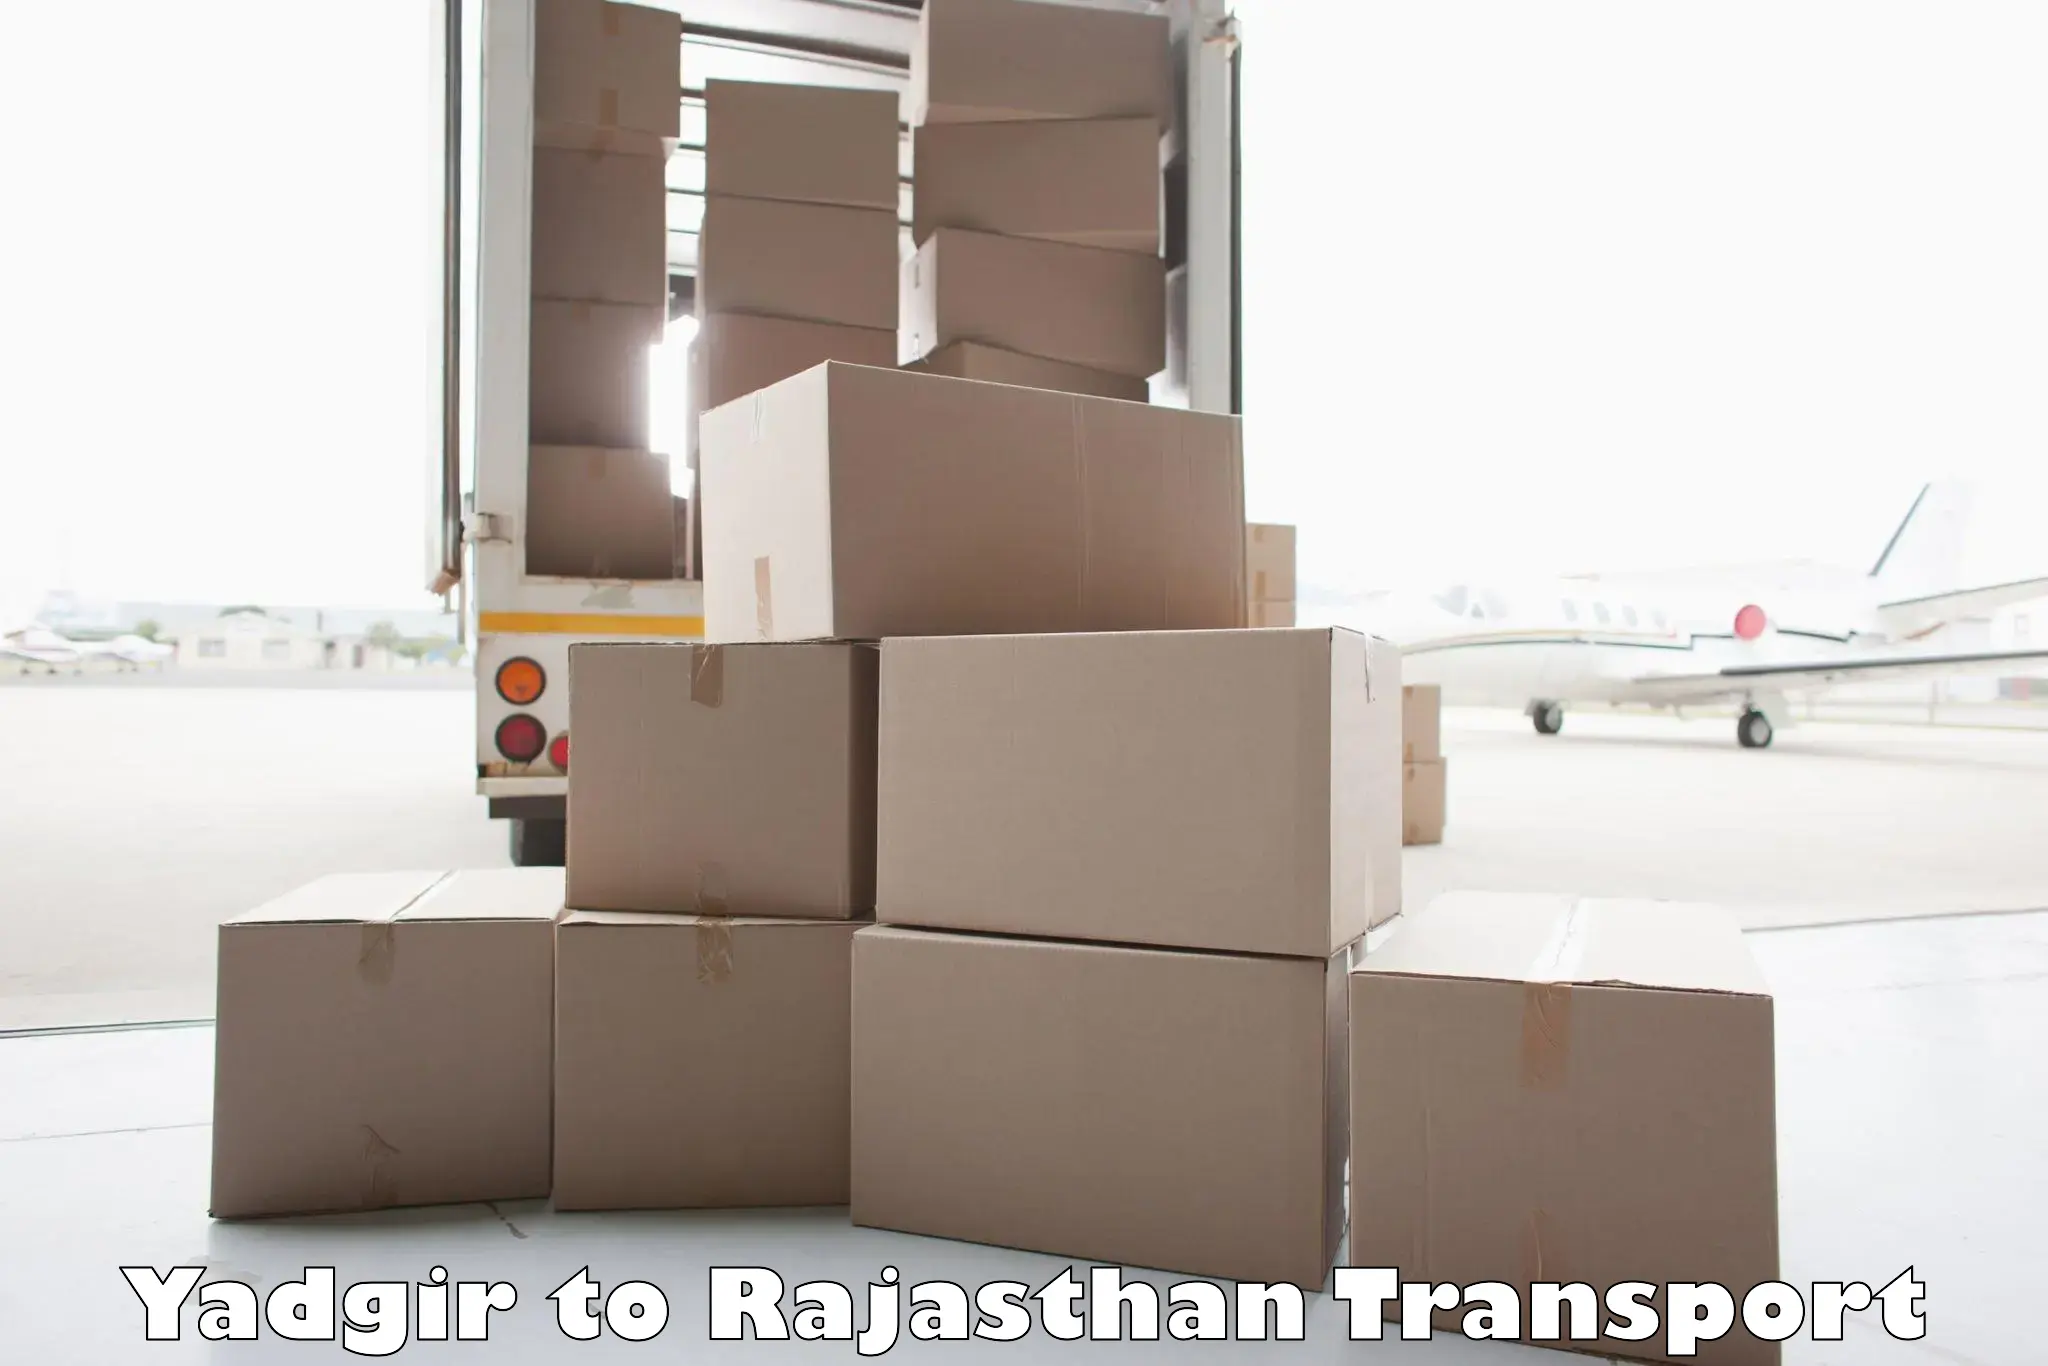 Commercial transport service Yadgir to Ajmer